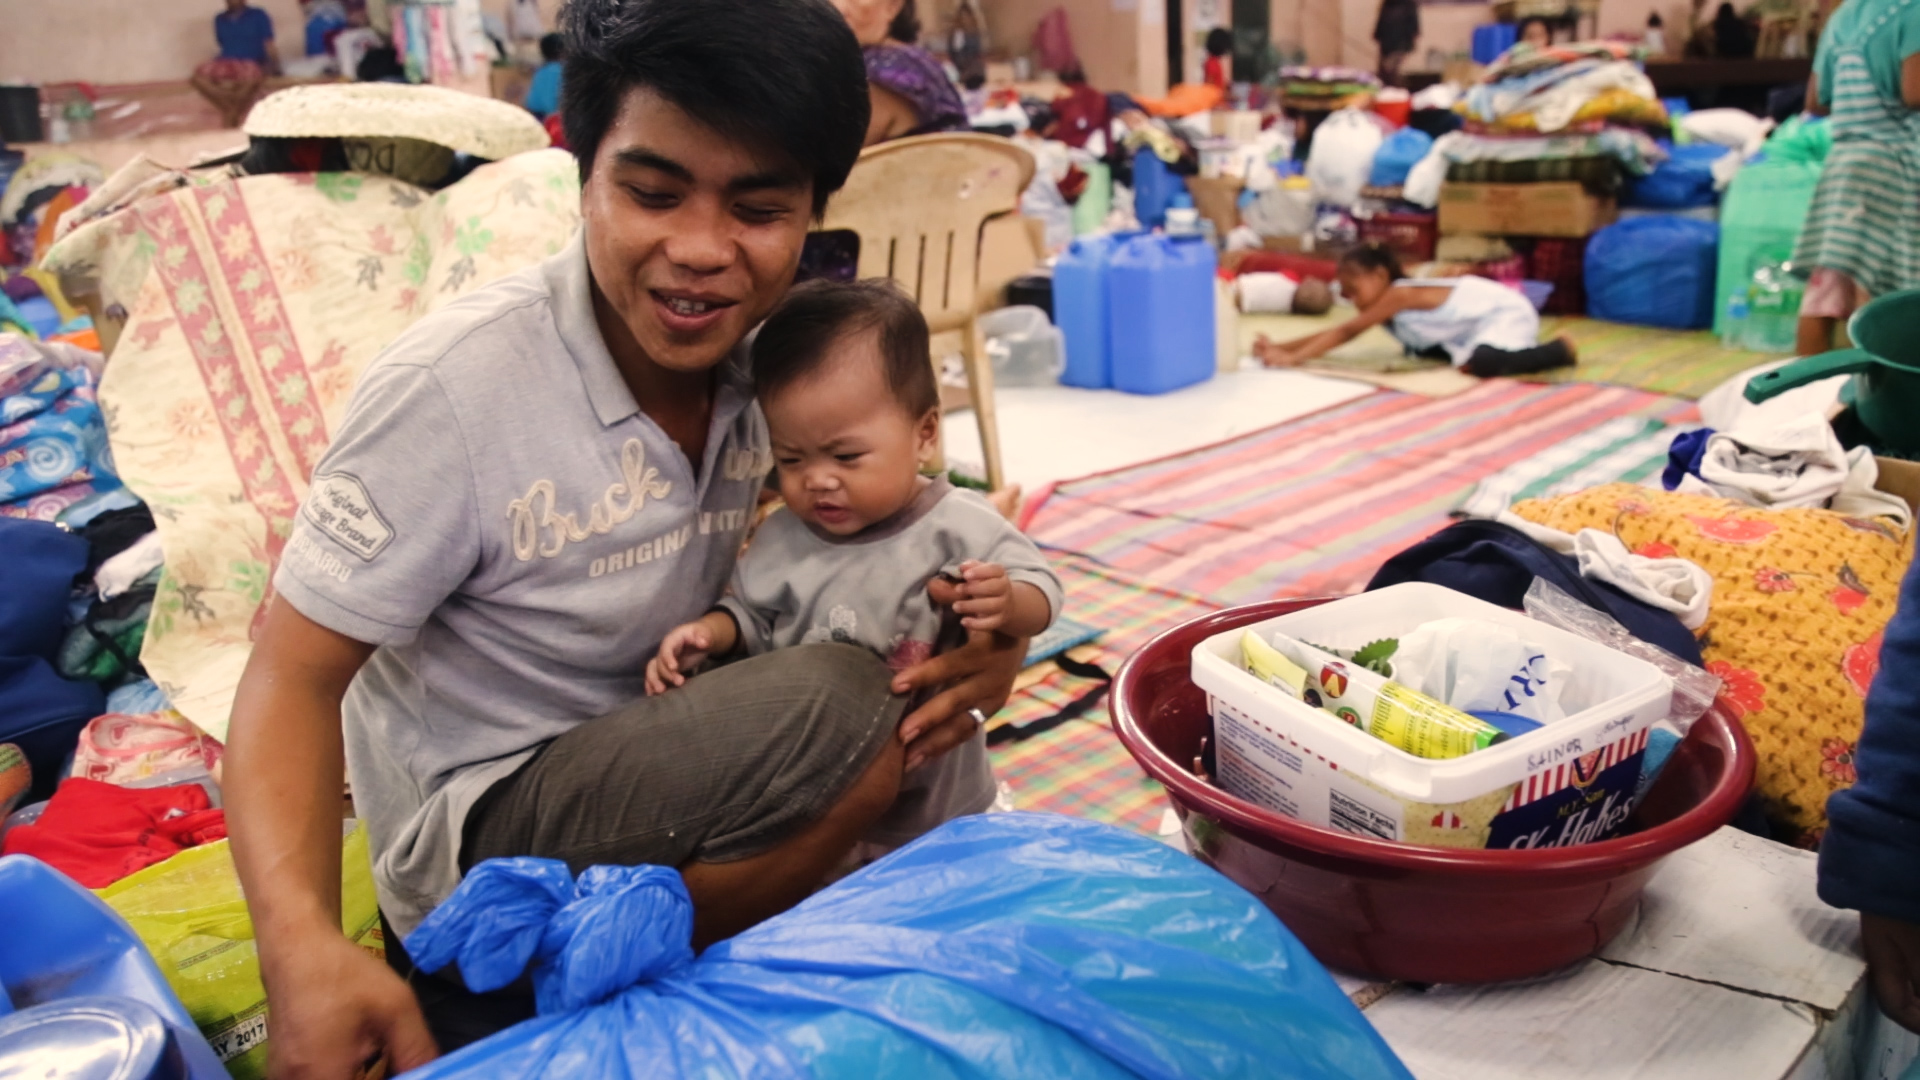 A dad, a baby, and an evacuation center